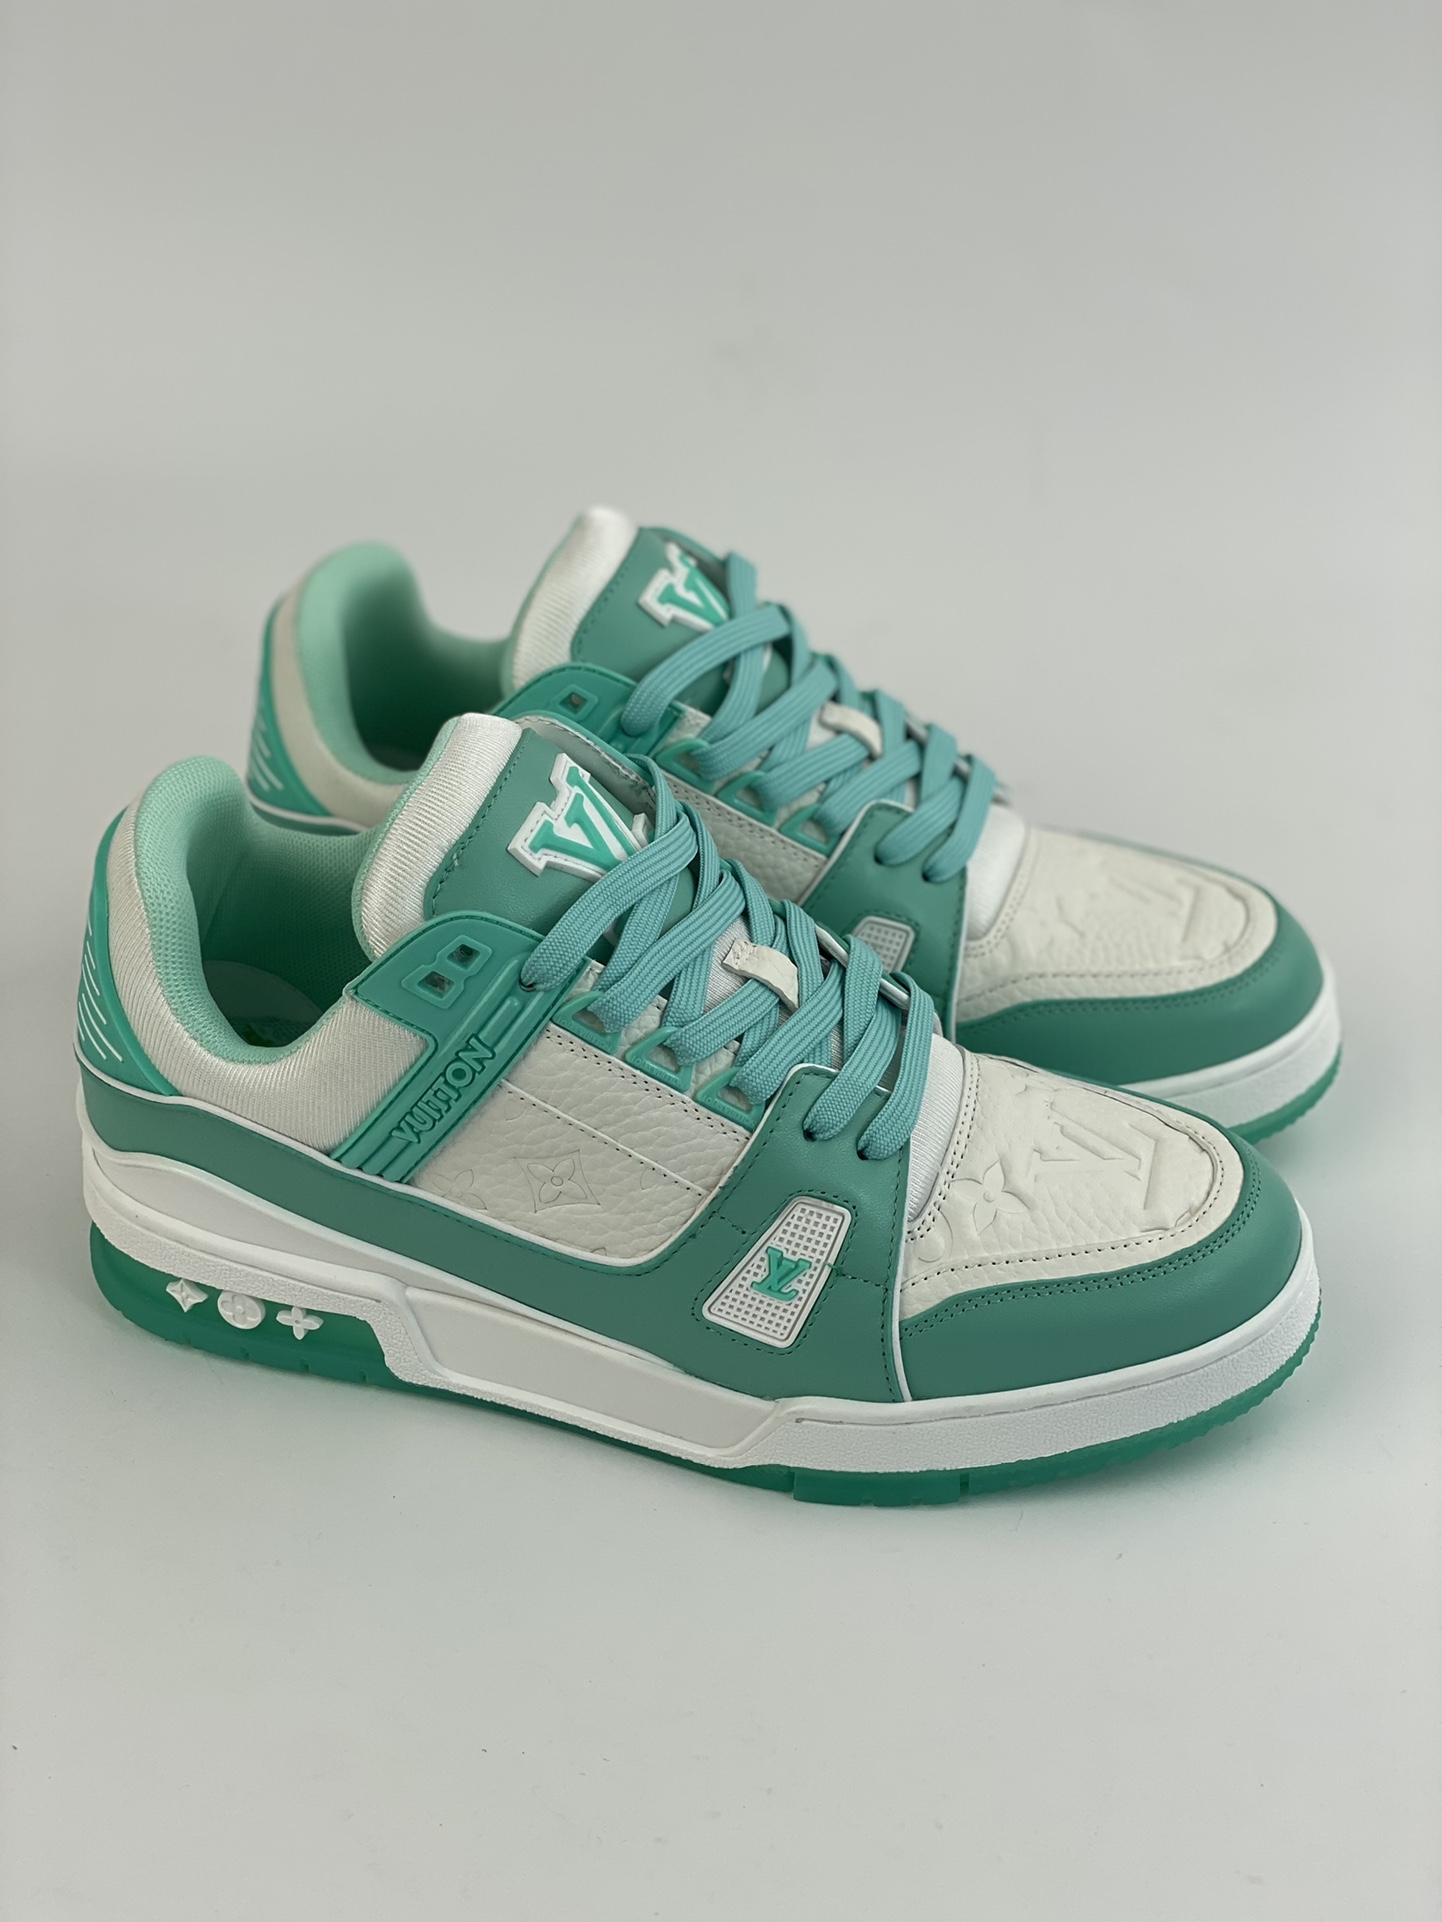 2021s LV Trainer limited edition latest color matching is limited to domestic sales